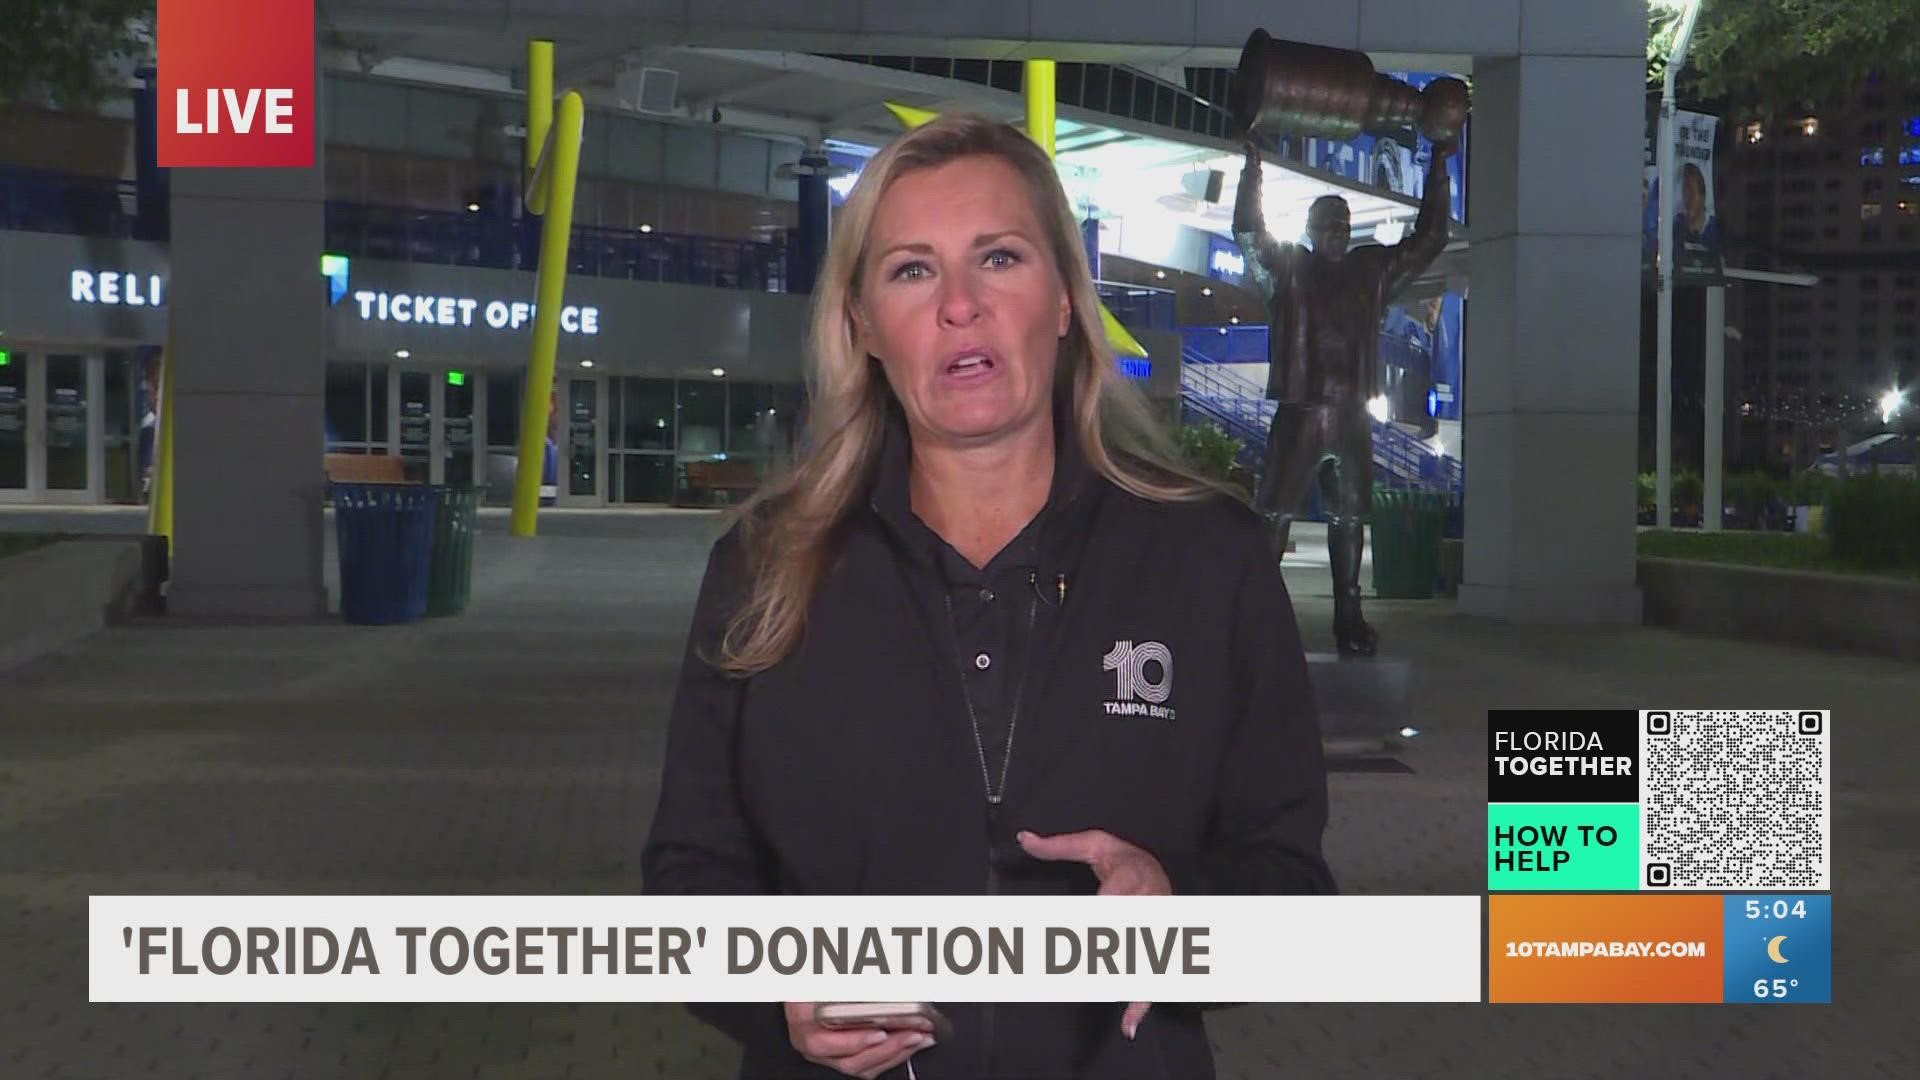 10 Tampa Bay is teaming up with the Tampa Bay Lightning and Cox radio stations to raise money and collect supplies for people suffering from Hurricane Ian.